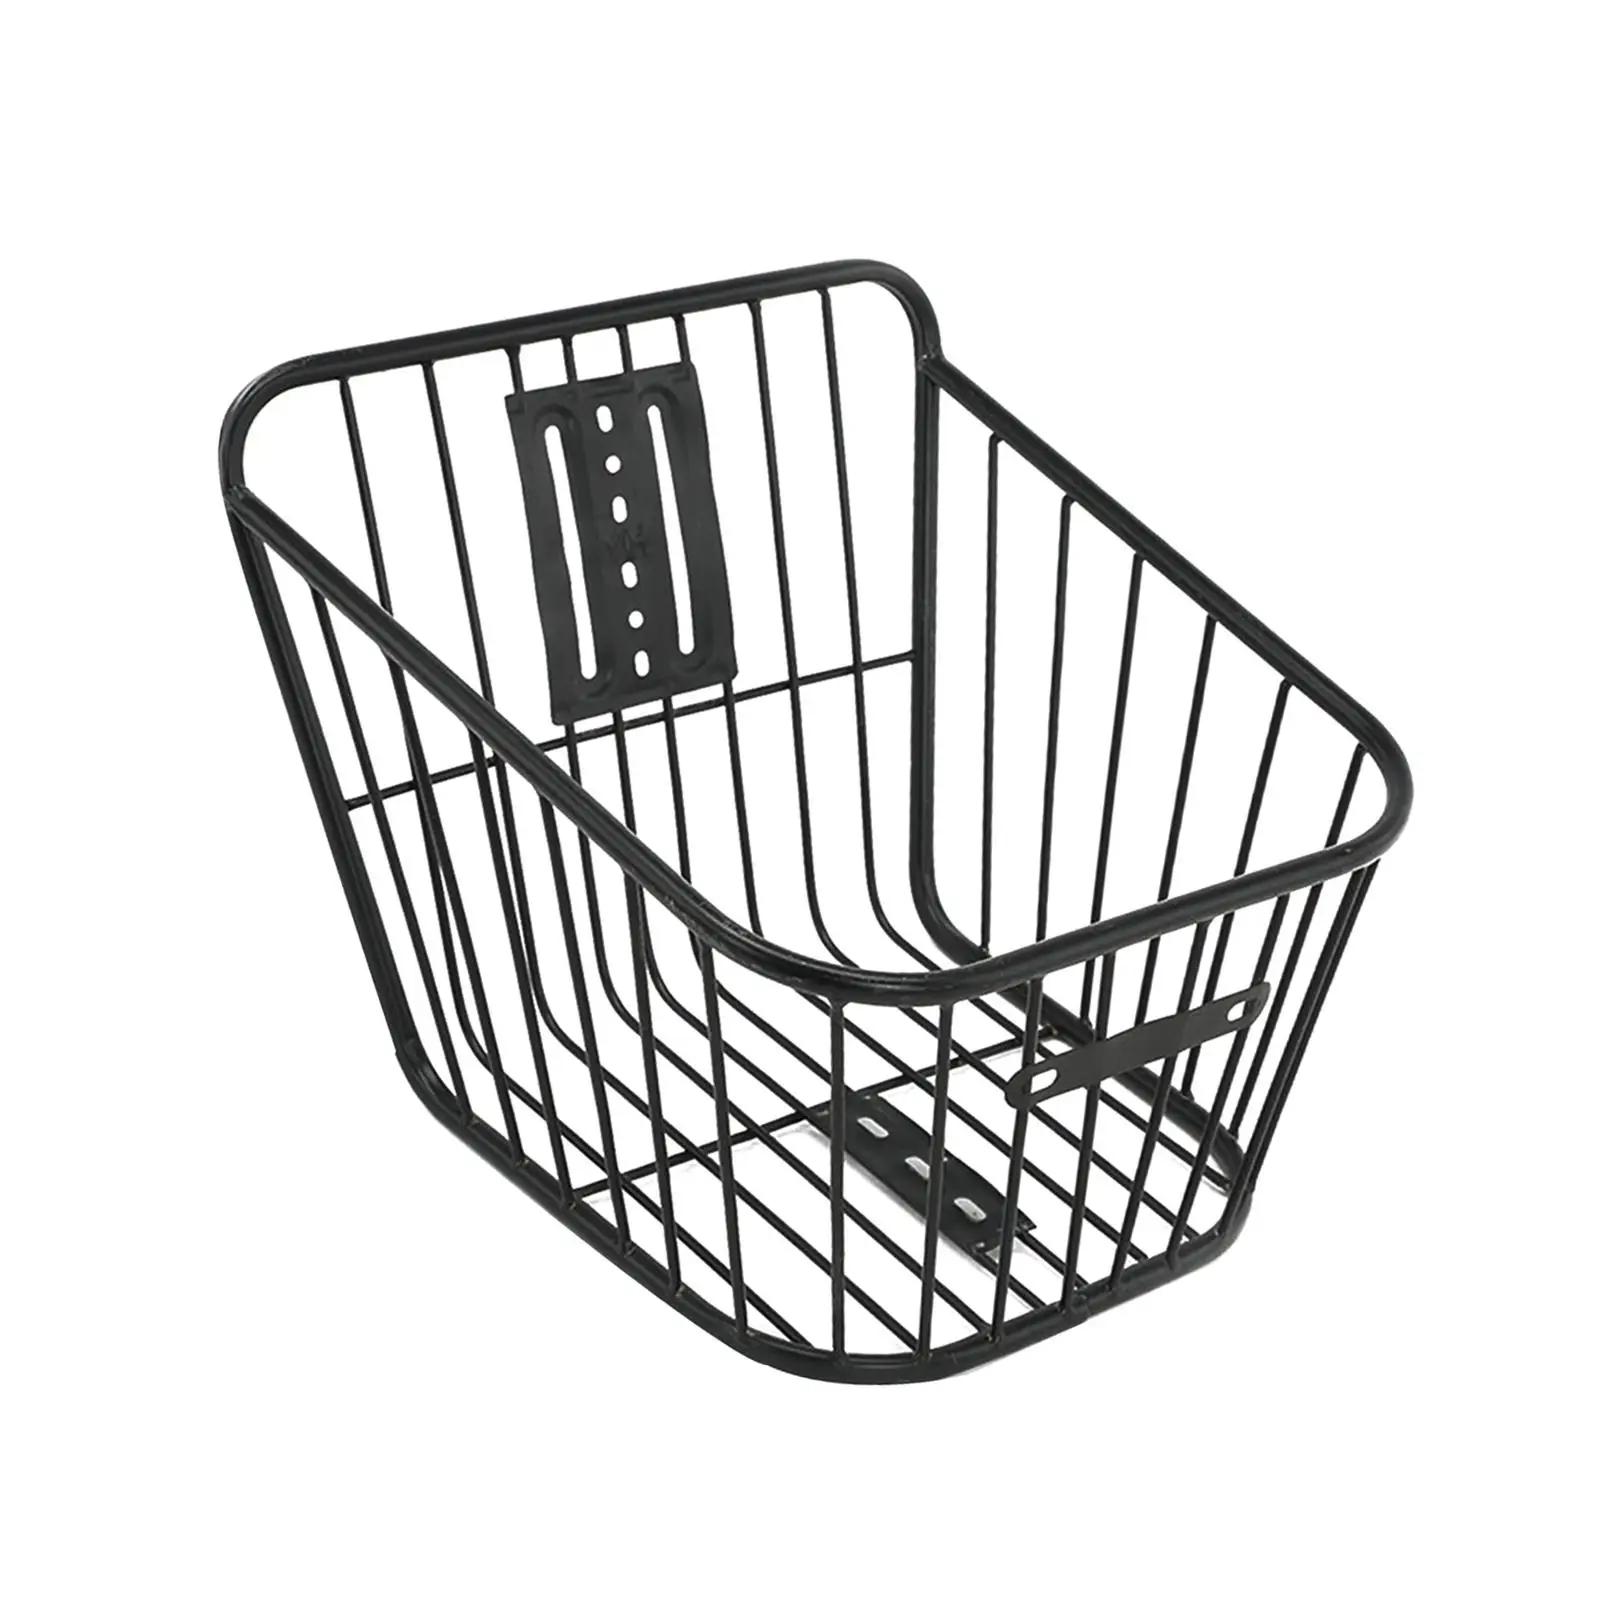 Bike Metal Wire Rear Basket without Cover Weatherproof Easily Install Large Capacity Accessories Strengthened Frame for Pet